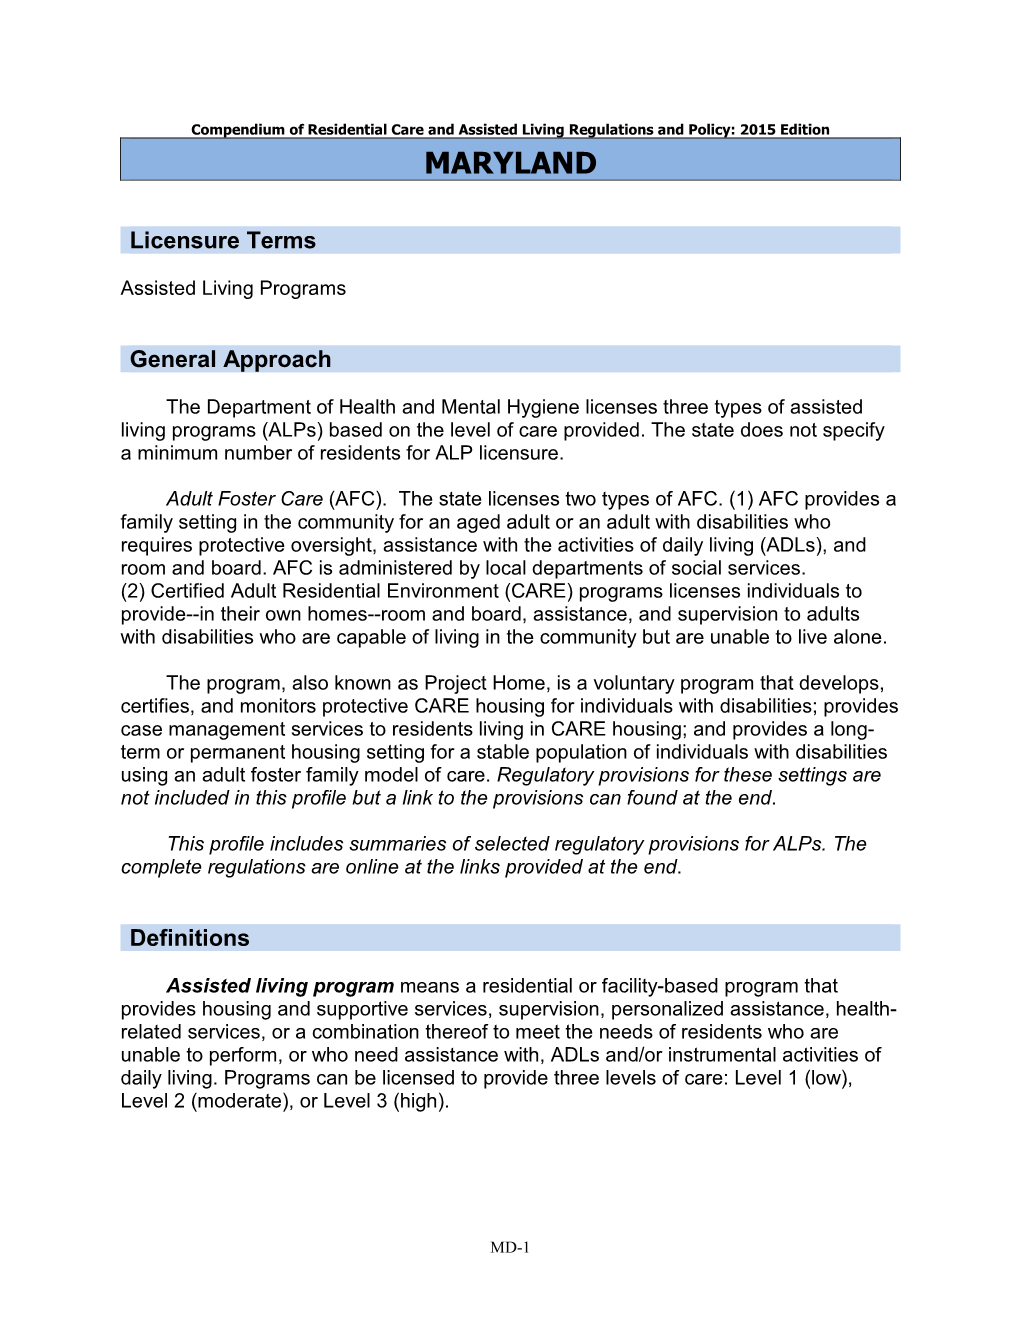 Residential Care/Assisted Living Compendium: Maryland